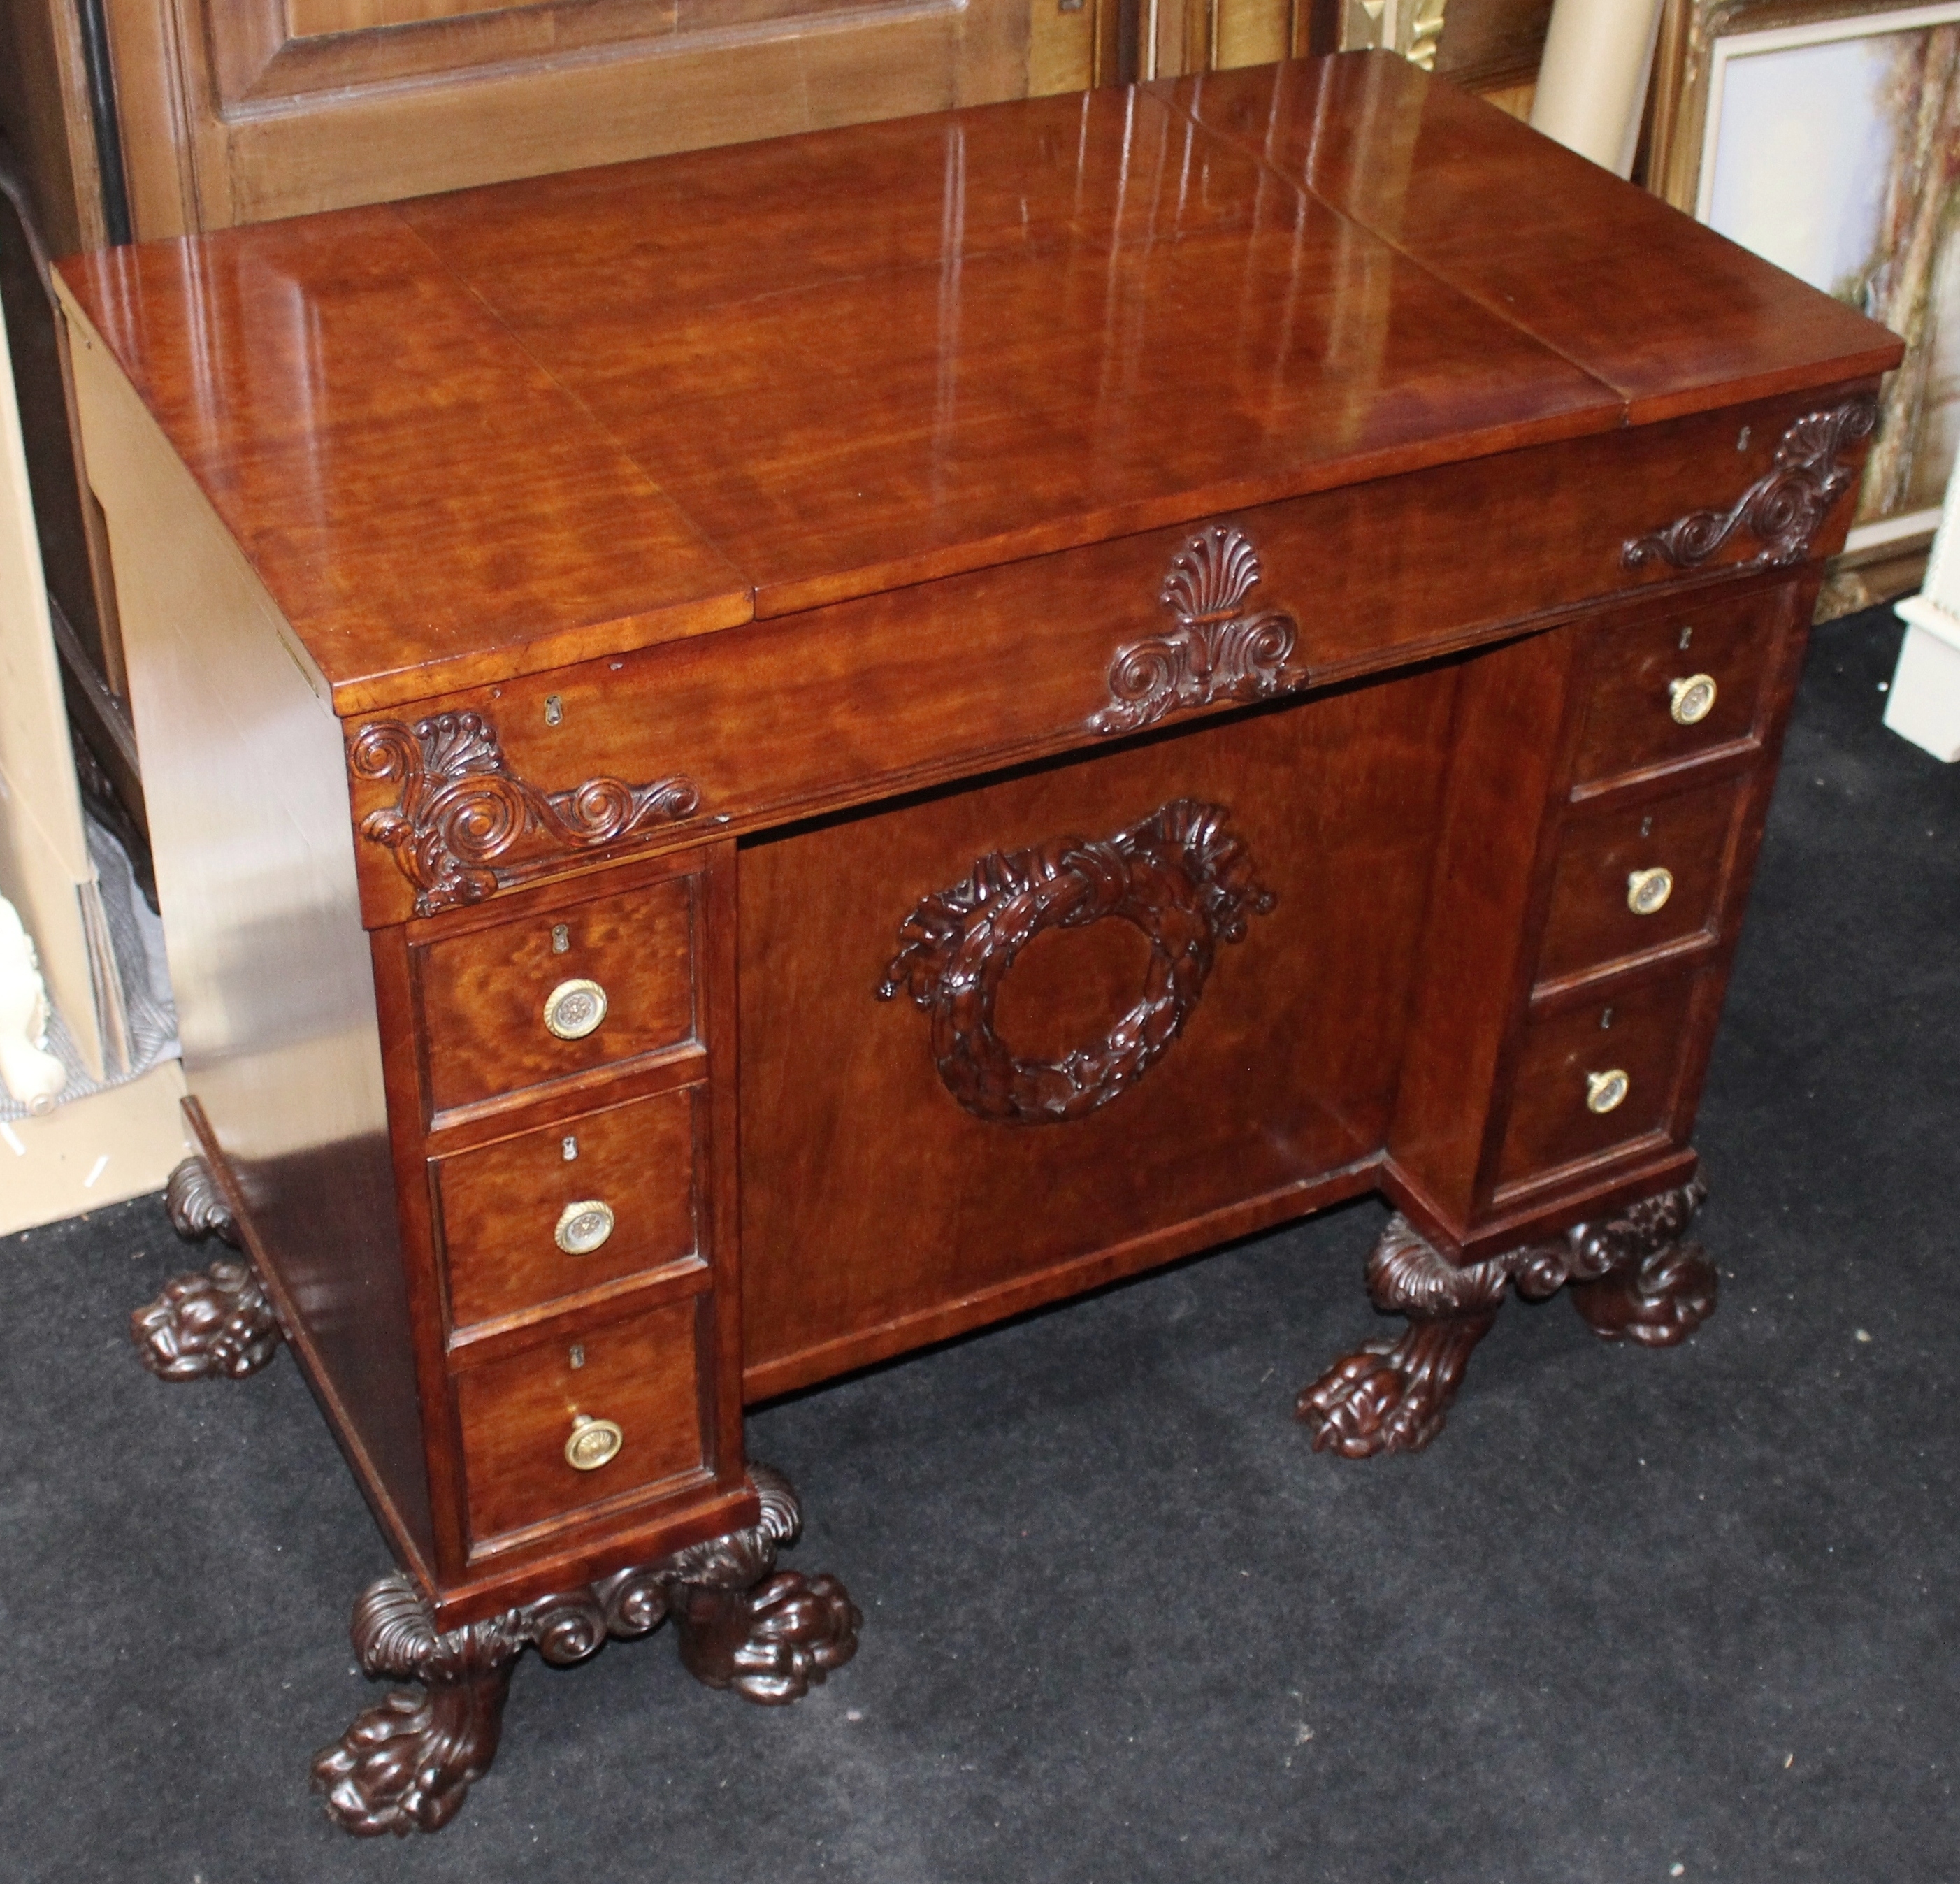 Fine Late 18th c. Mahogany Desk with Carved Feet - Image 4 of 8